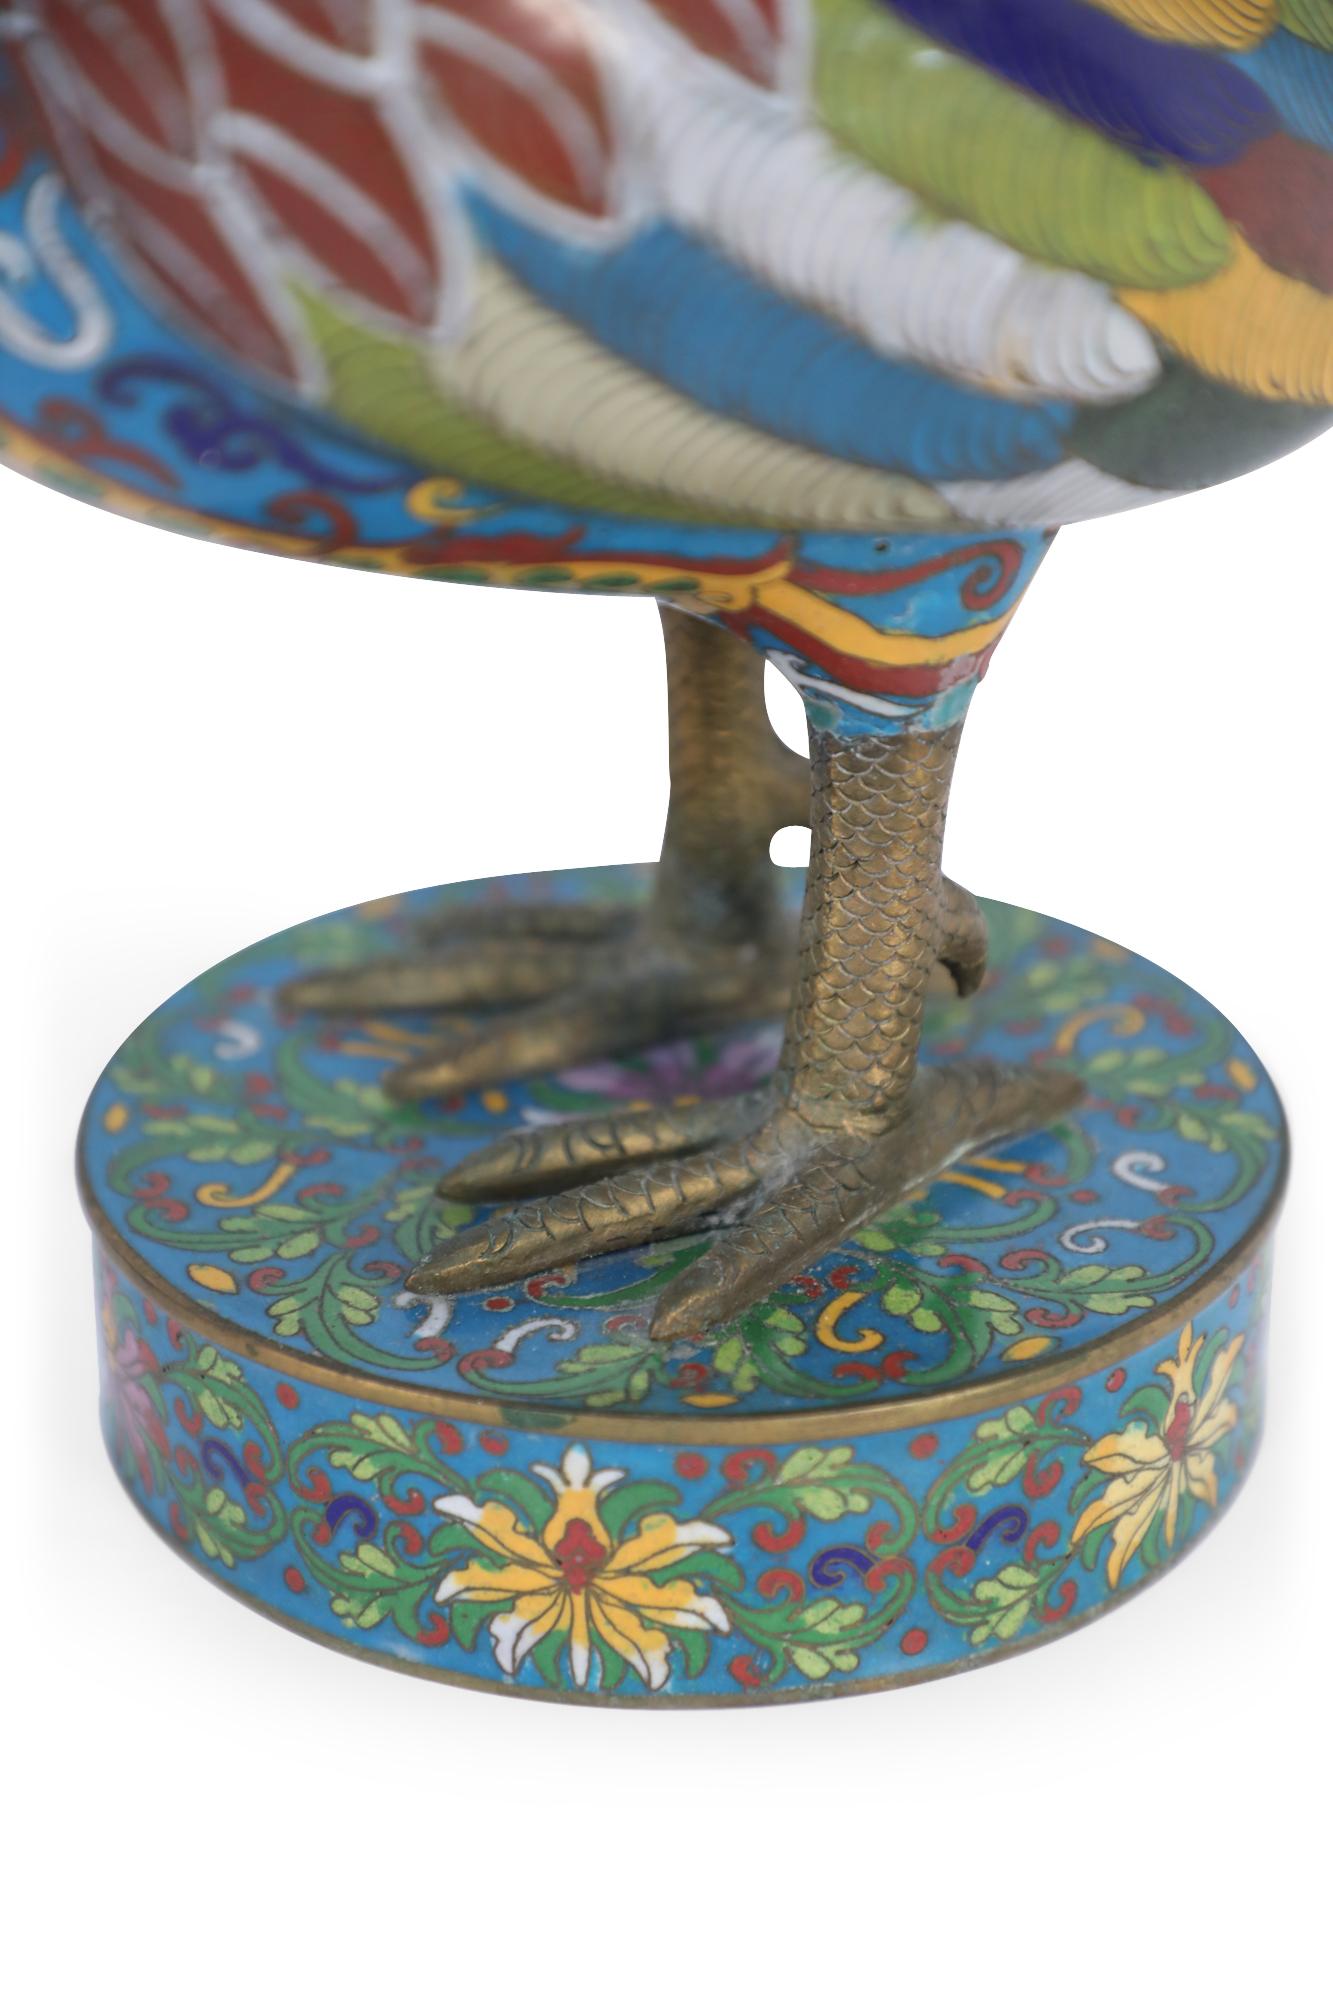 Pair of Early 20th Century Chinese Multi-Colored Cloisonne Rooster Sculptures For Sale 6